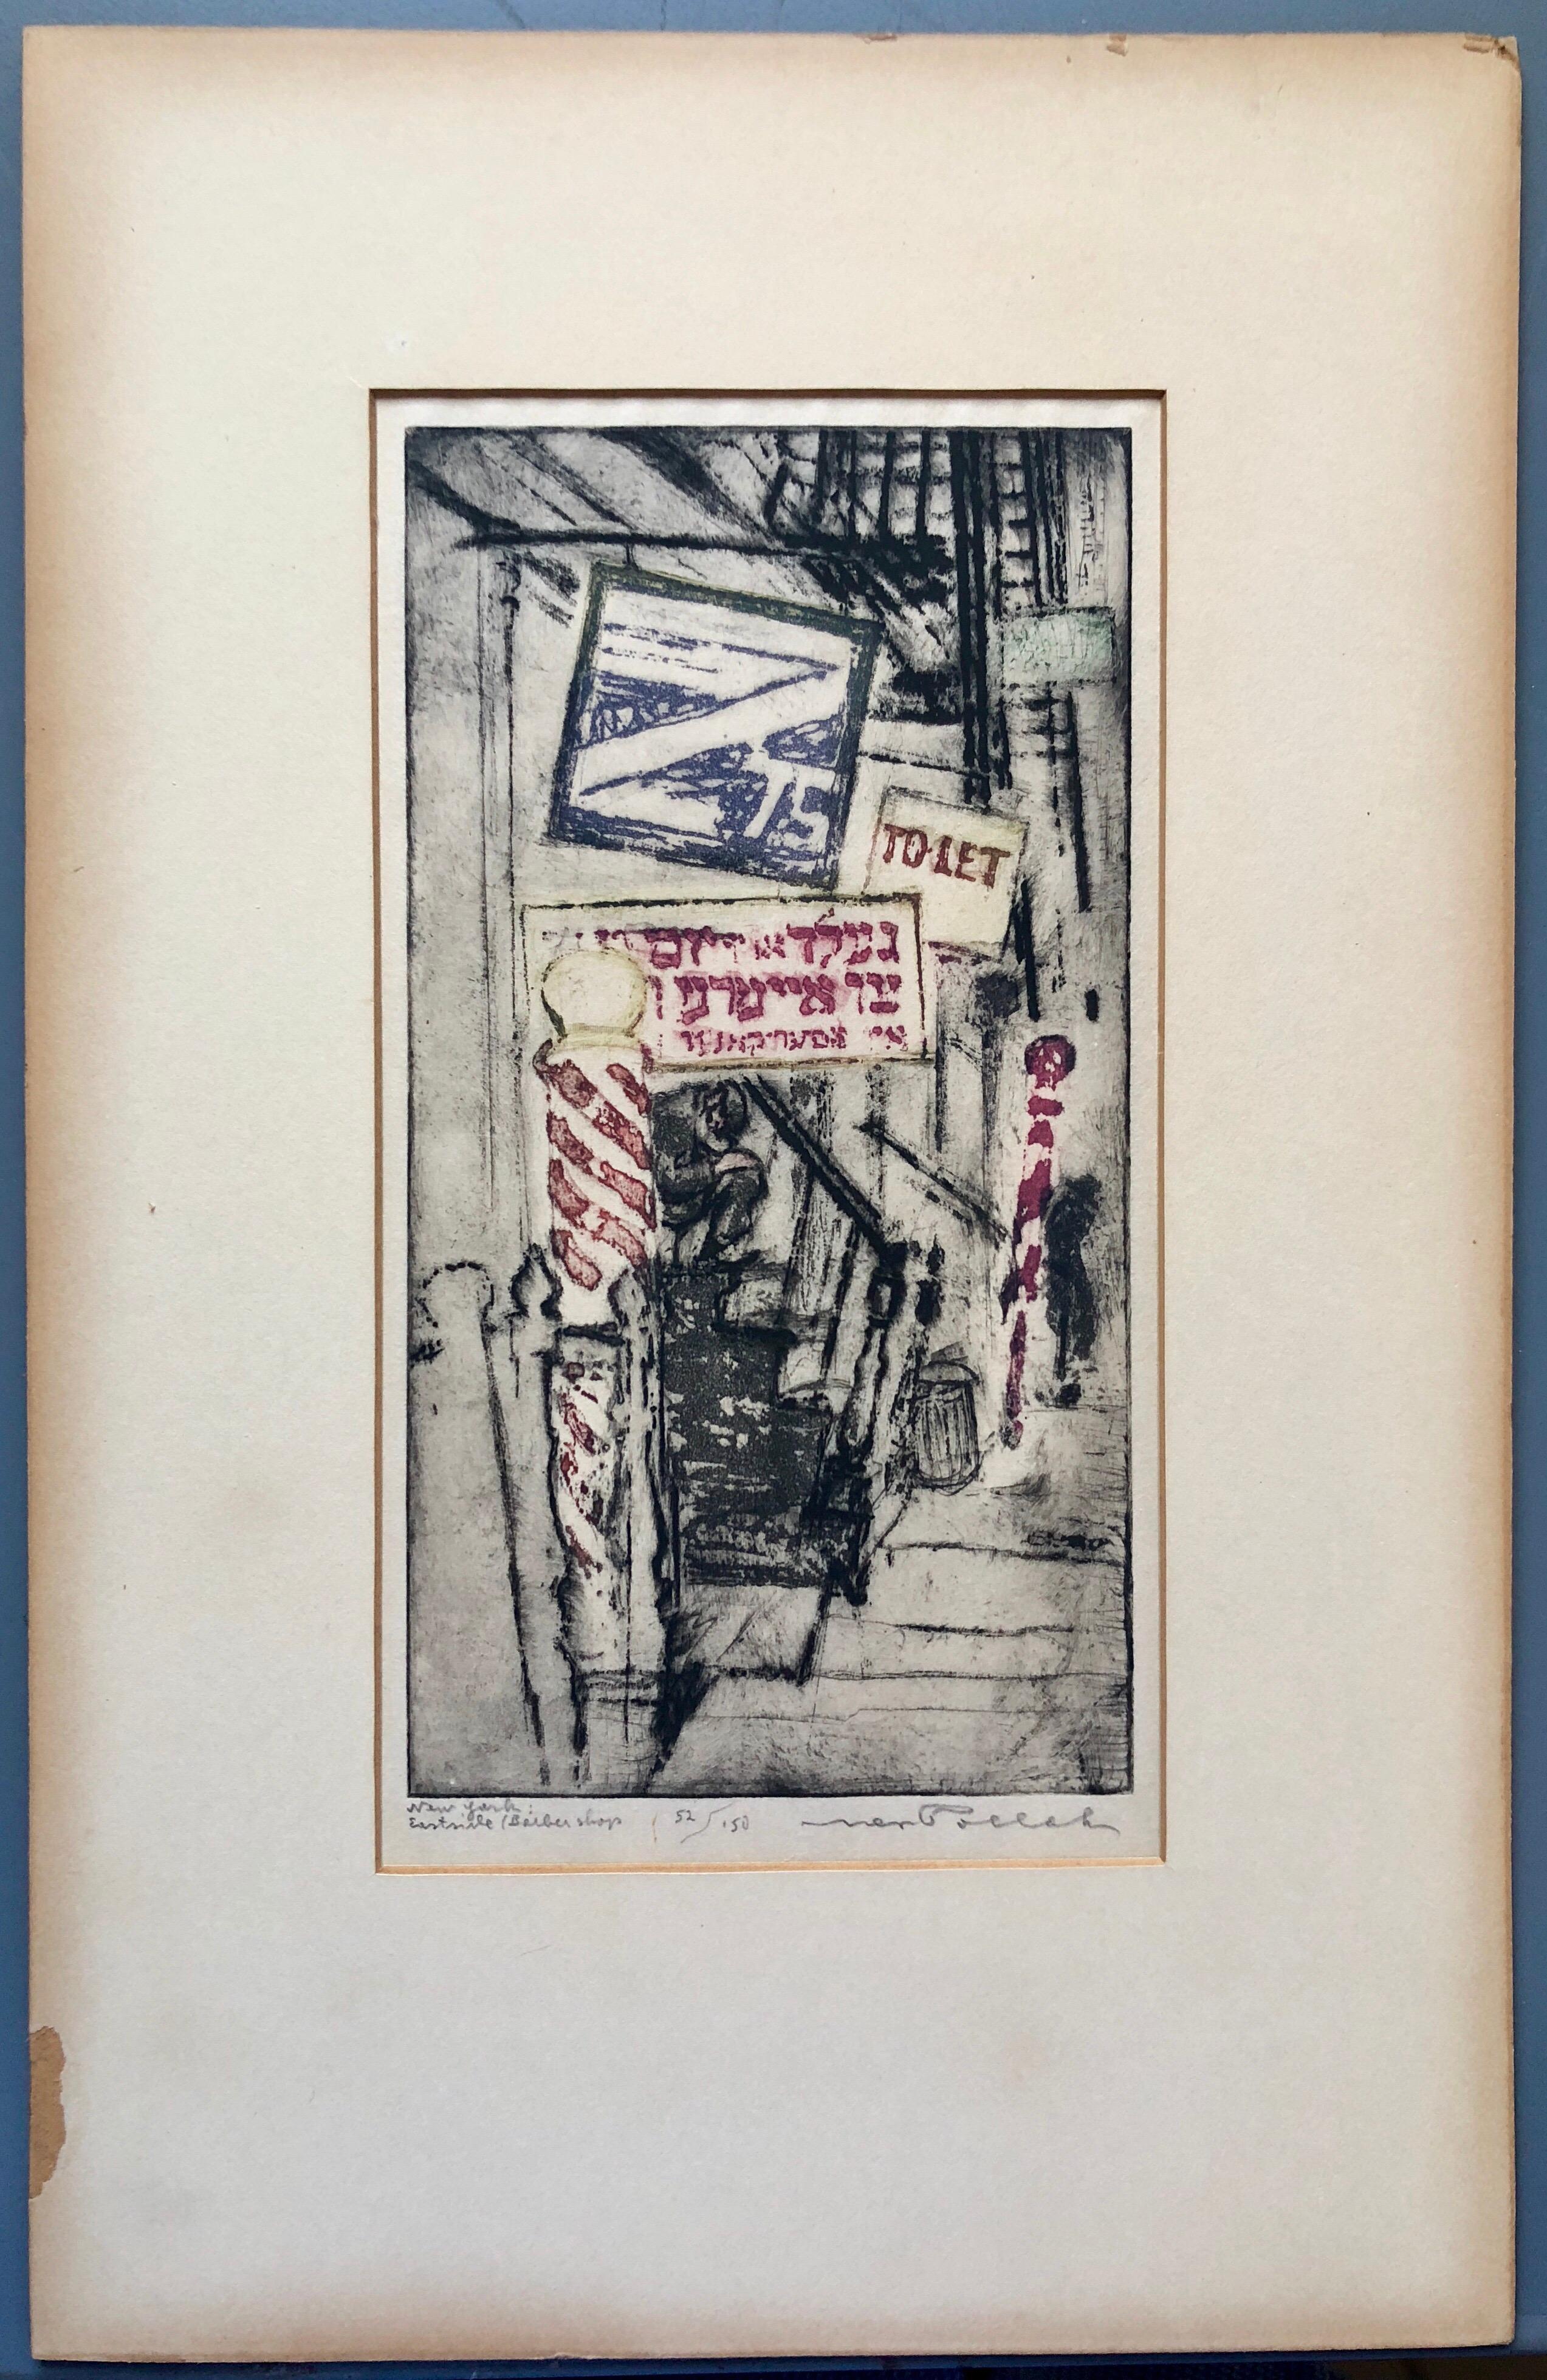 Hand signed, numbered and titled. It depicts the old lower east side of New York city with its tenements and different language signes, barber shop poles and loitering figures. This one has Yiddish before it became Chinatown. 
8 7/8 x 4 3/4